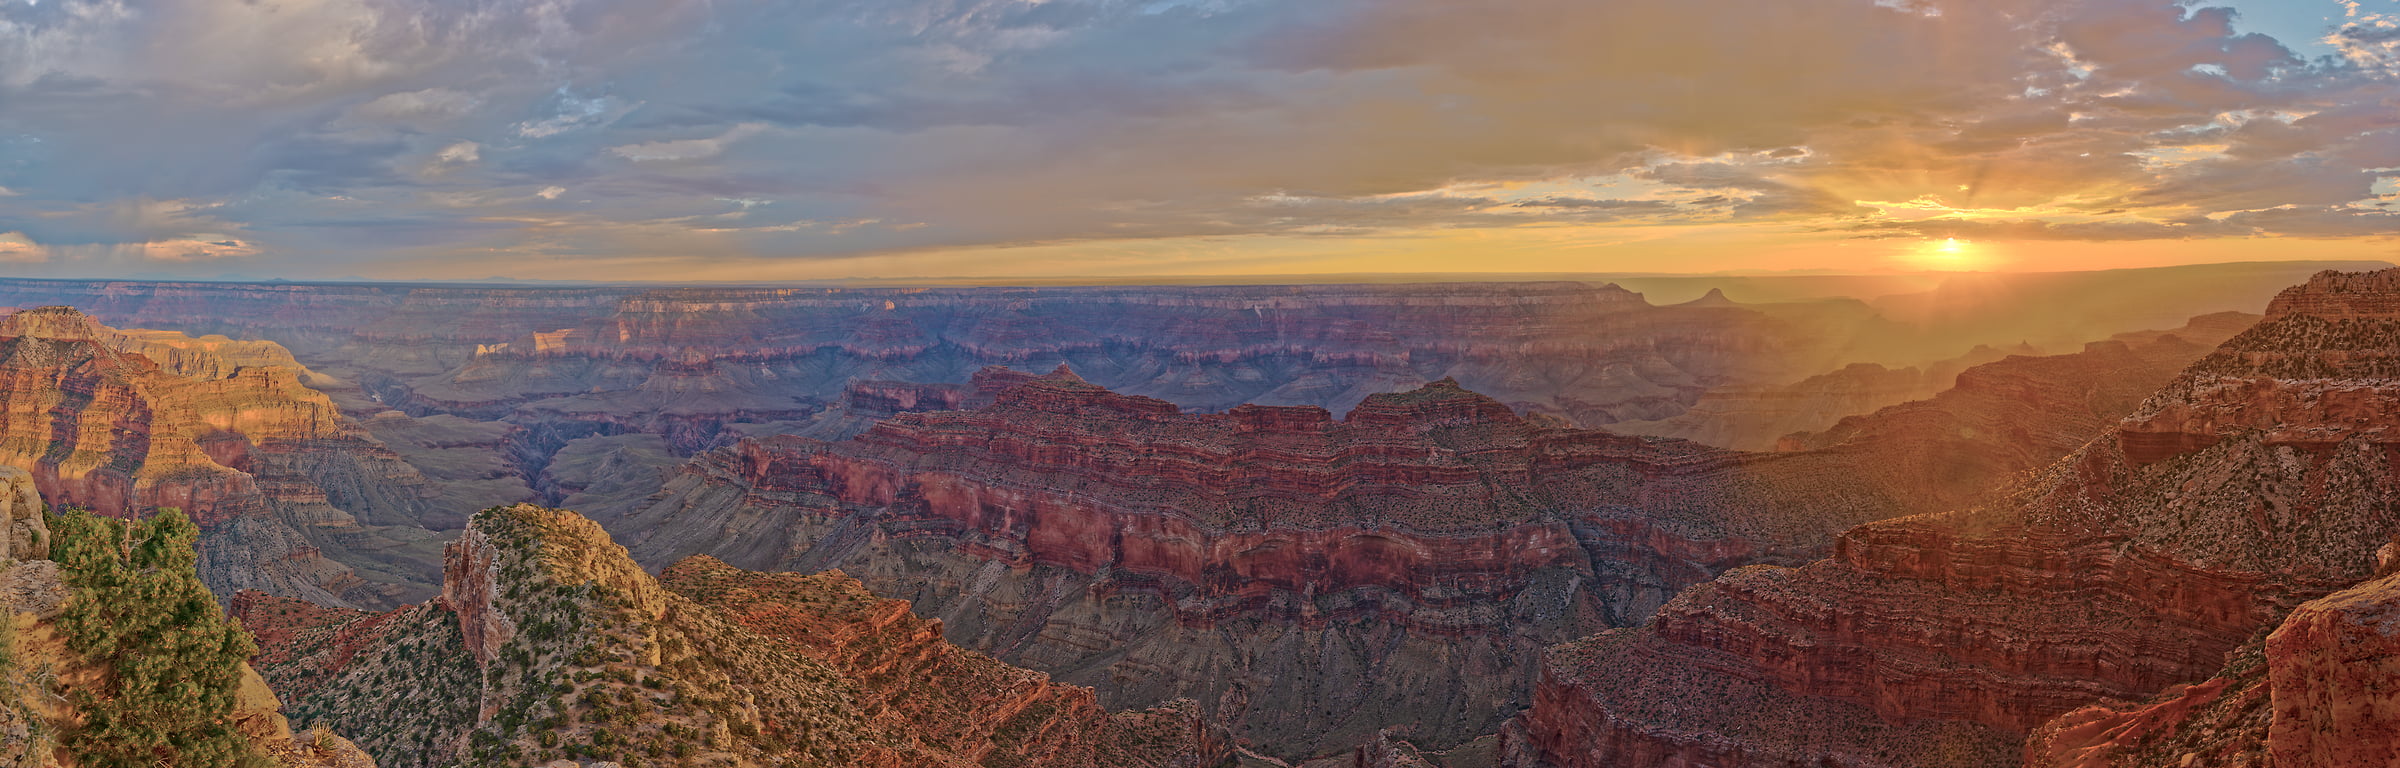 1,059 megapixels! A very high resolution, large-format VAST photo print of the Grand Canyon at sunset; landscape photograph created by John Freeman in Point Sublime, North Rim, Grand Canyon National Park, Arizonan